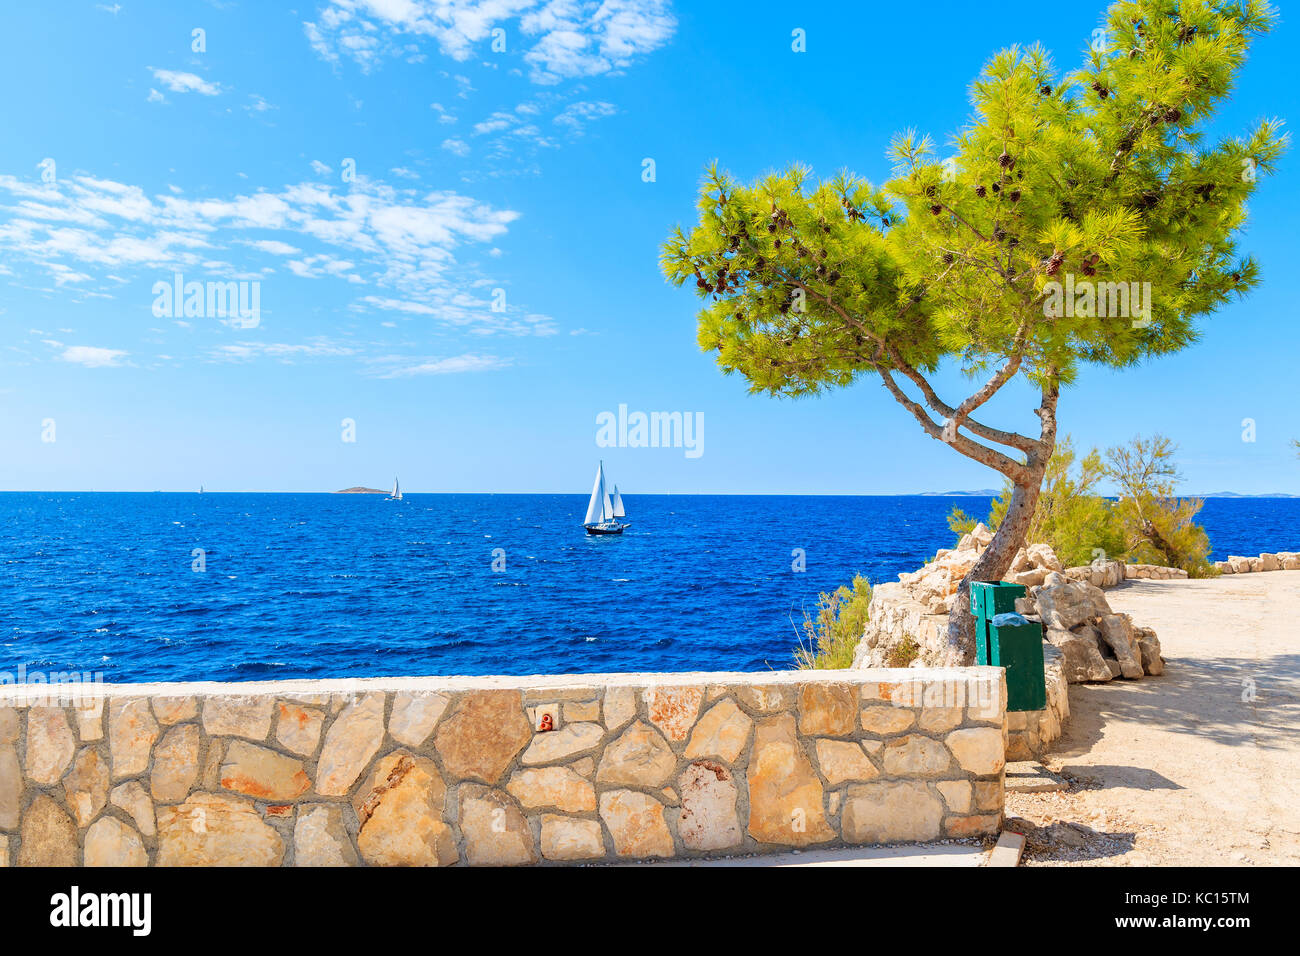 Sailing boat on blue sea with stone wall of costal promenade with green pine tree in foreground, Primosten town, Dalmatia, Croatia Stock Photo